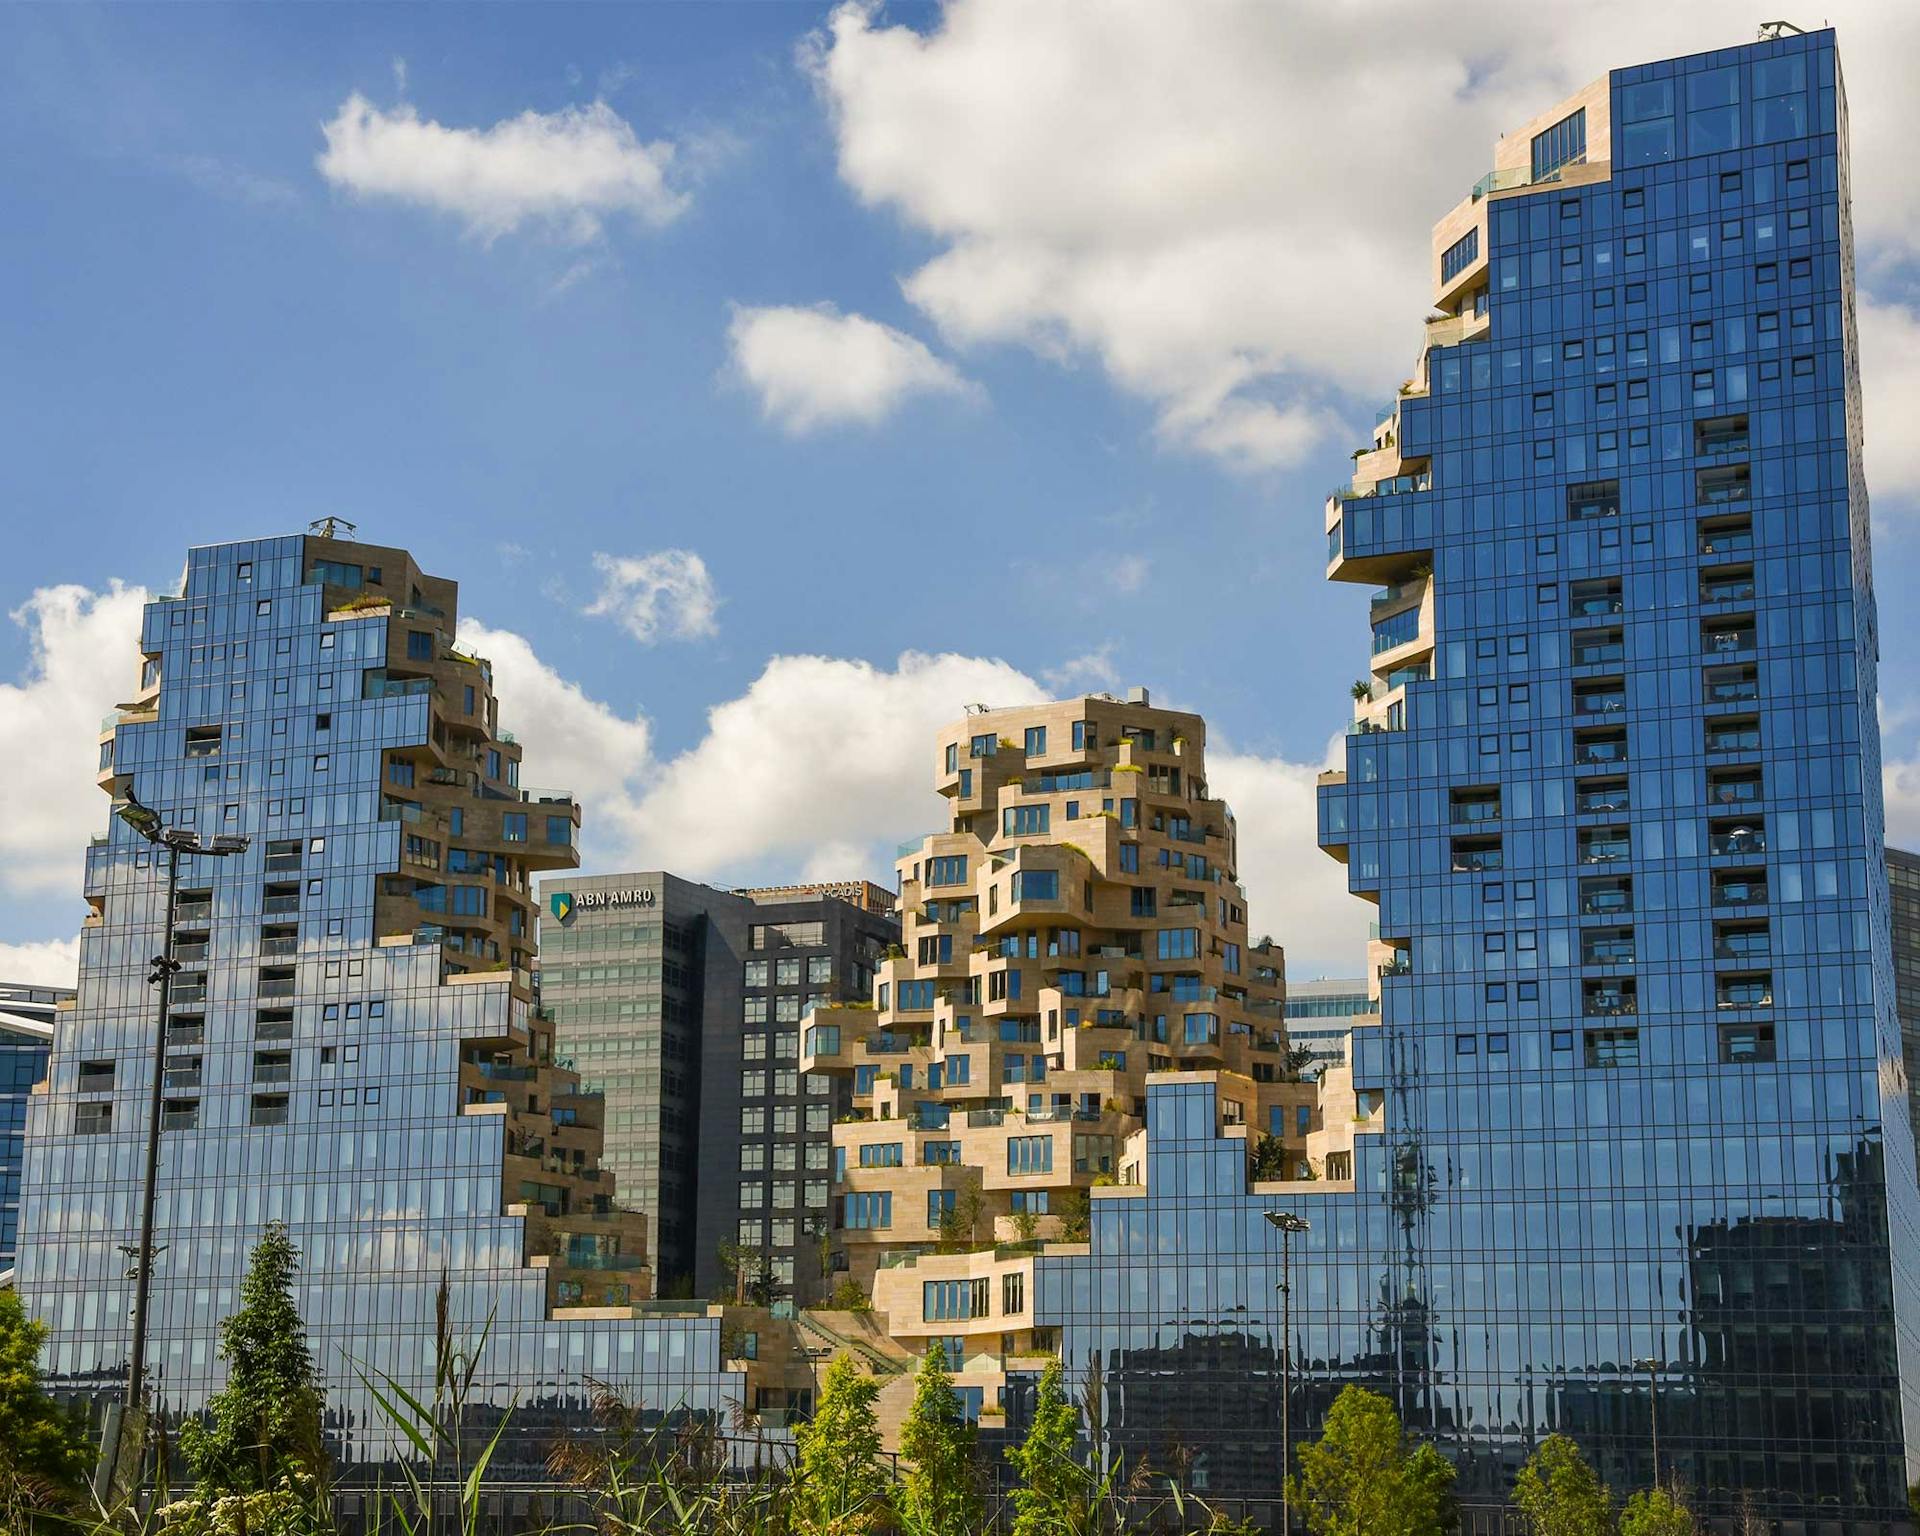 Valley, a sustainable three-tower building located in Amsterdam's Zuidas district